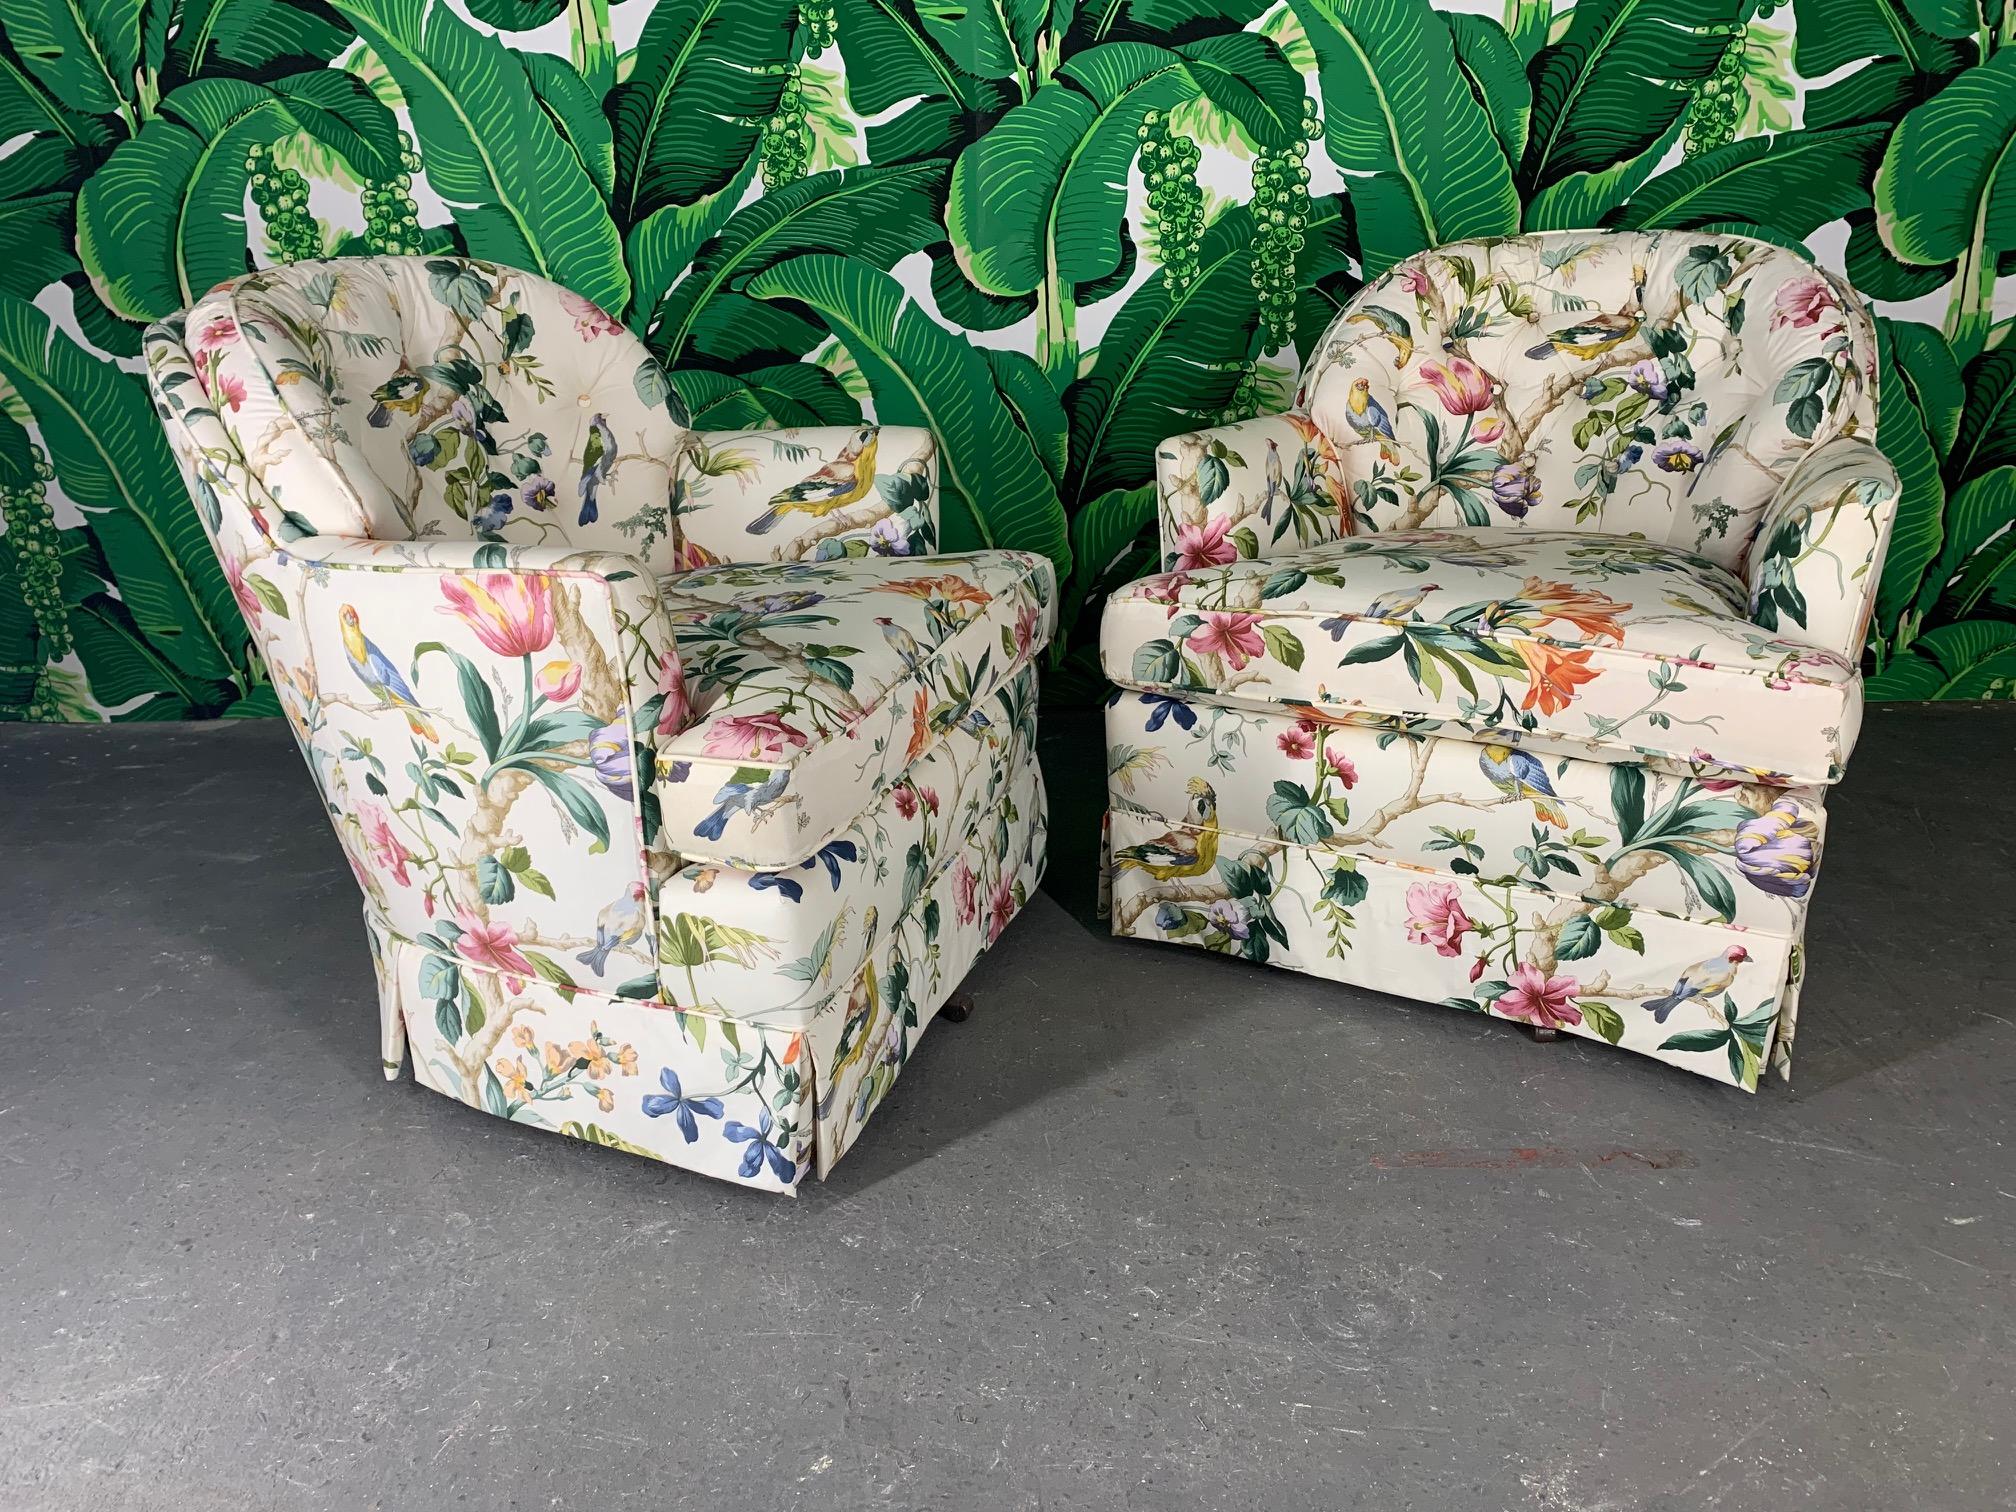 Pair of swivel club chairs upholstered in a fabulous floral print. Very good vintage condition overall.